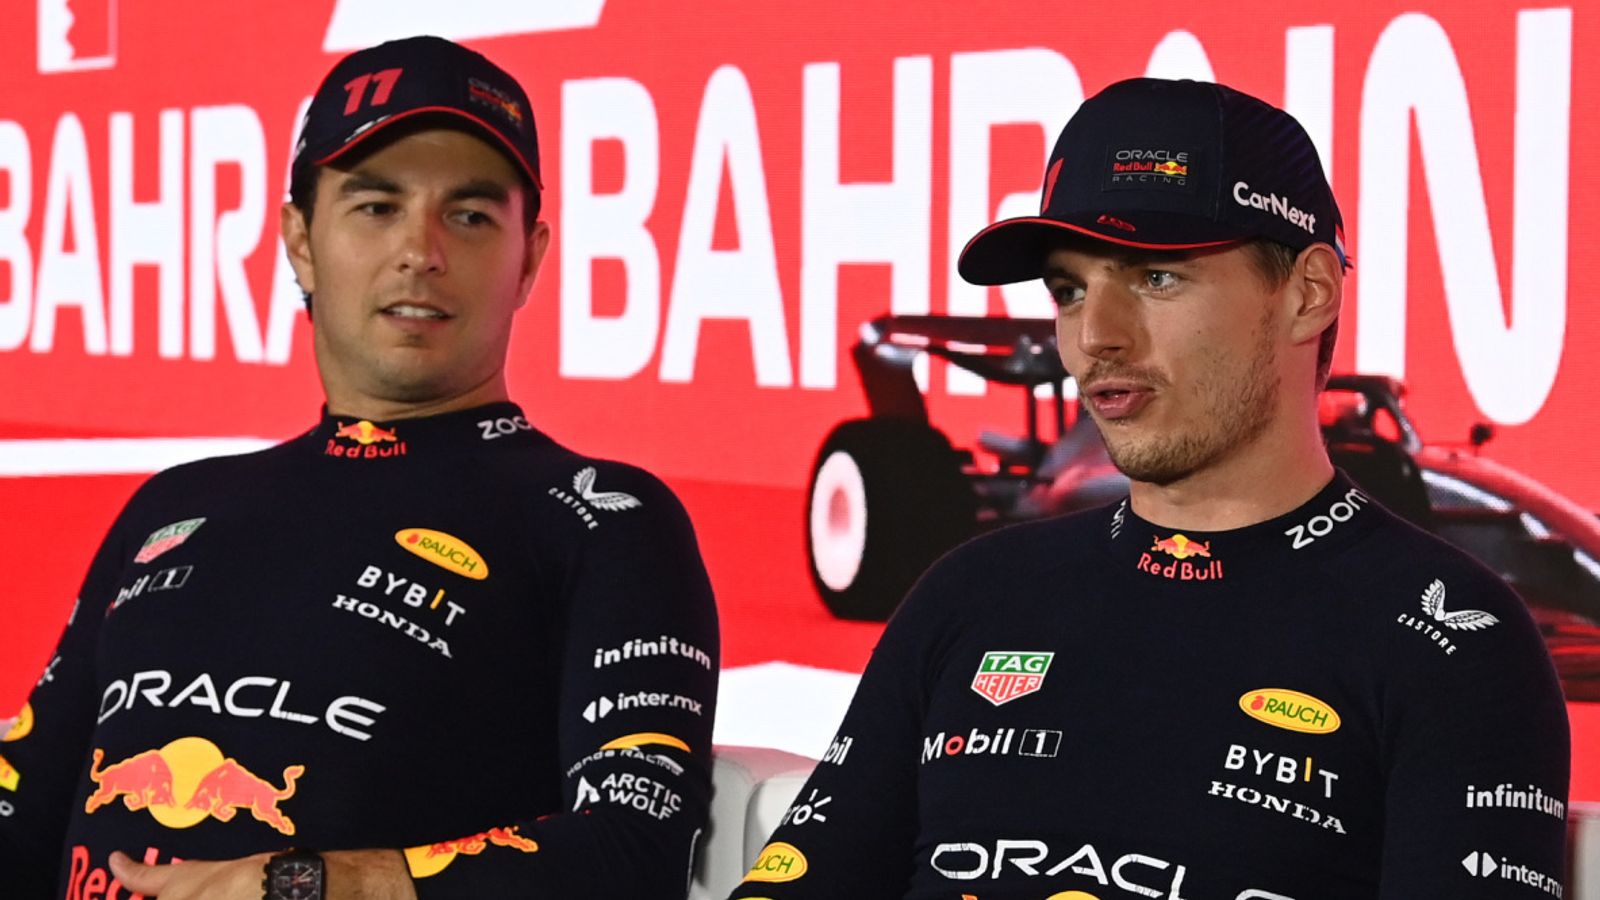 F1 podcast: Friction between Max Verstappen and Sergio Perez? Can Red Bull win every race this season? | F1 News